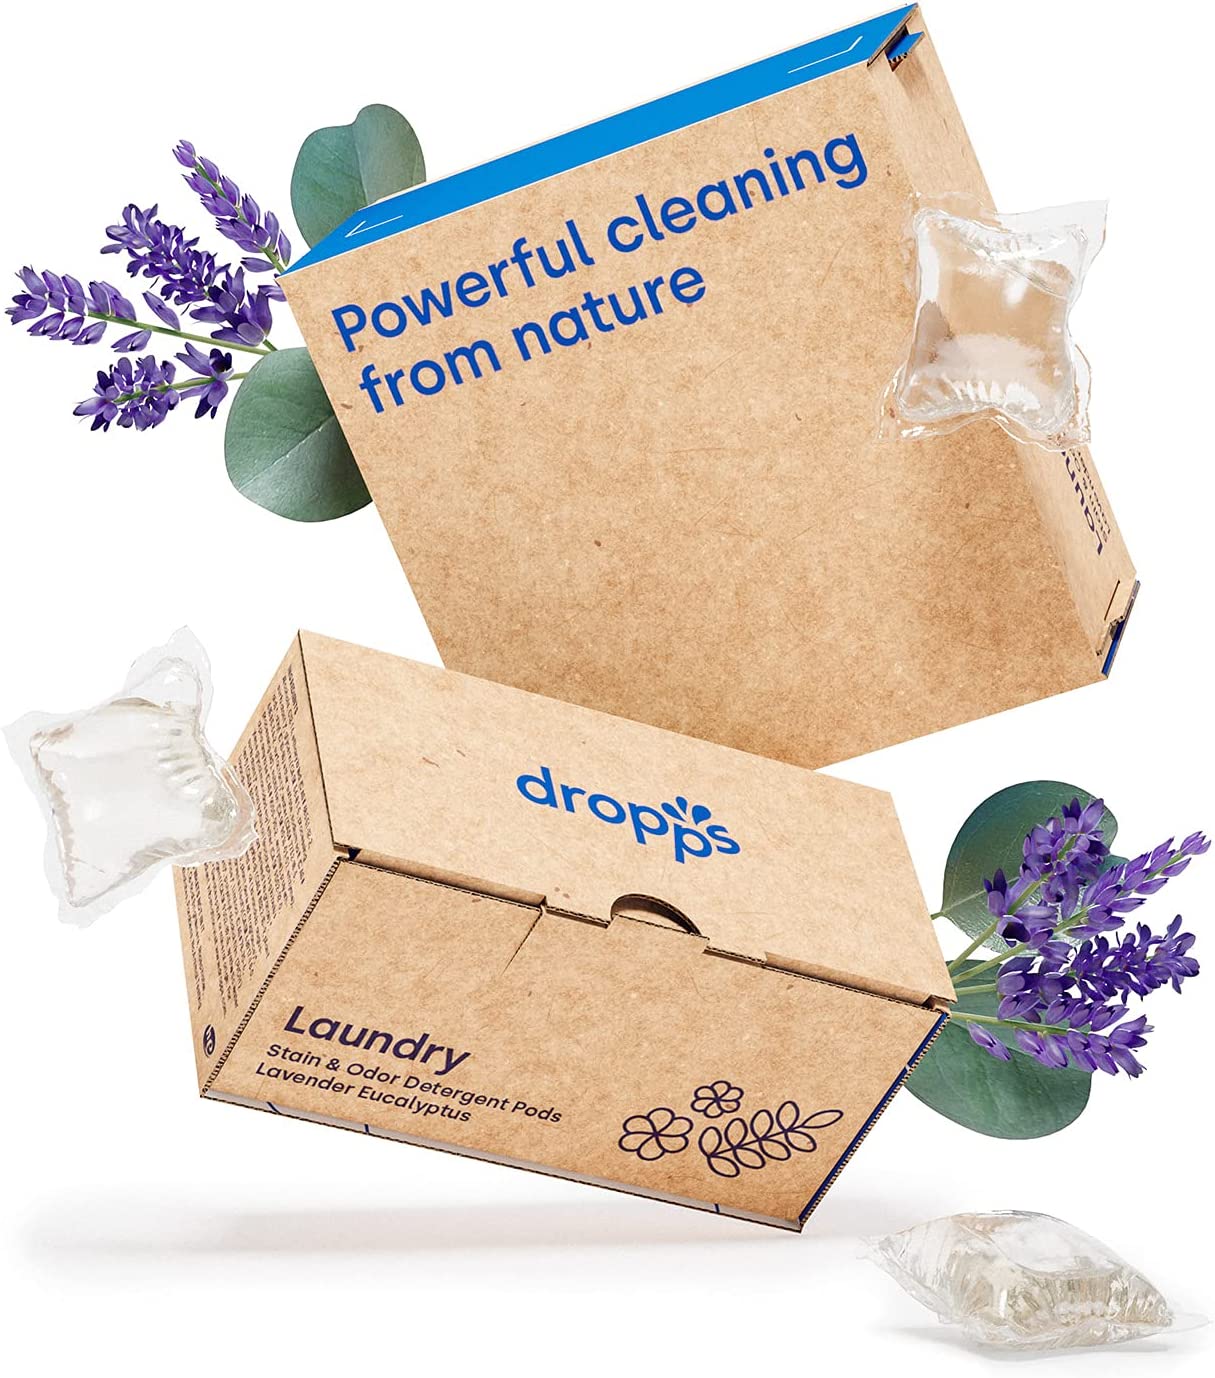 Dropps Laundry Stain _ Odor Detergent